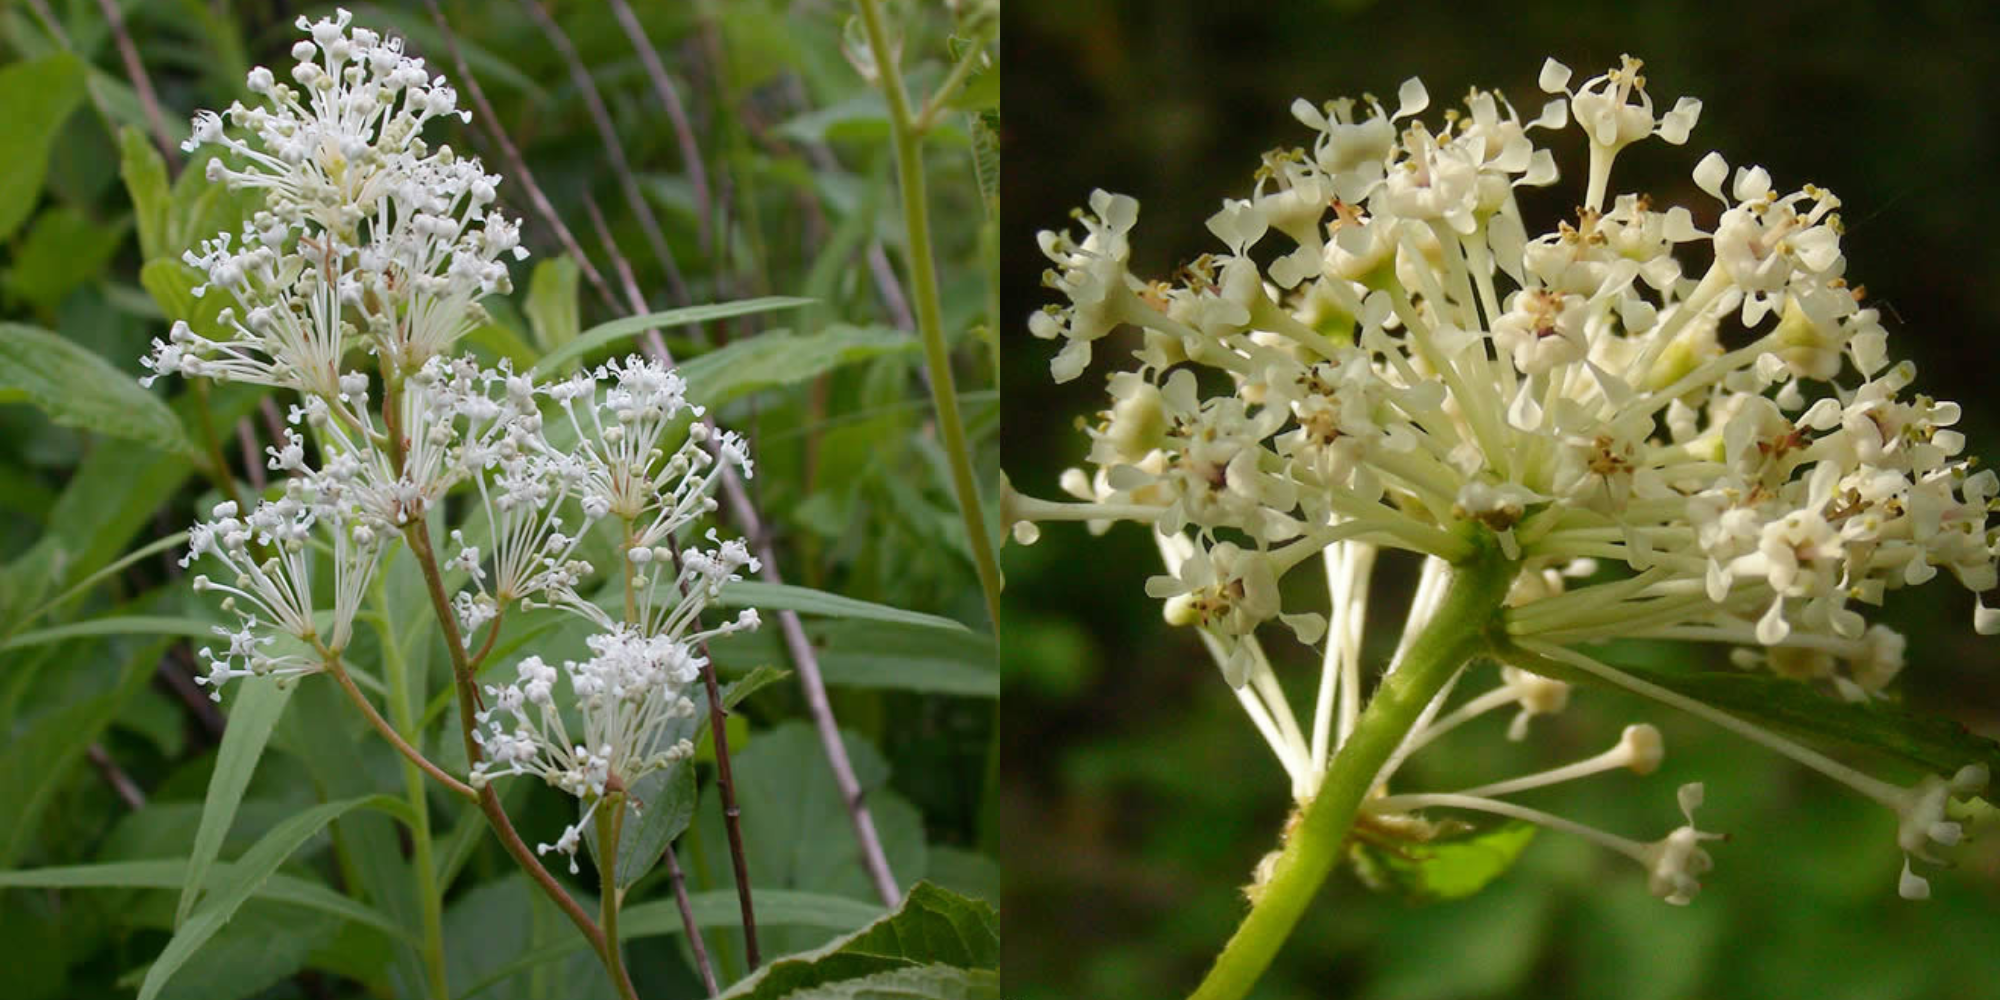 Two photos side by side. The left shows the elongated inflorescence of Ceanothus americanus and the right shows the more compact and rounded inflorescence of C. herbaceus.